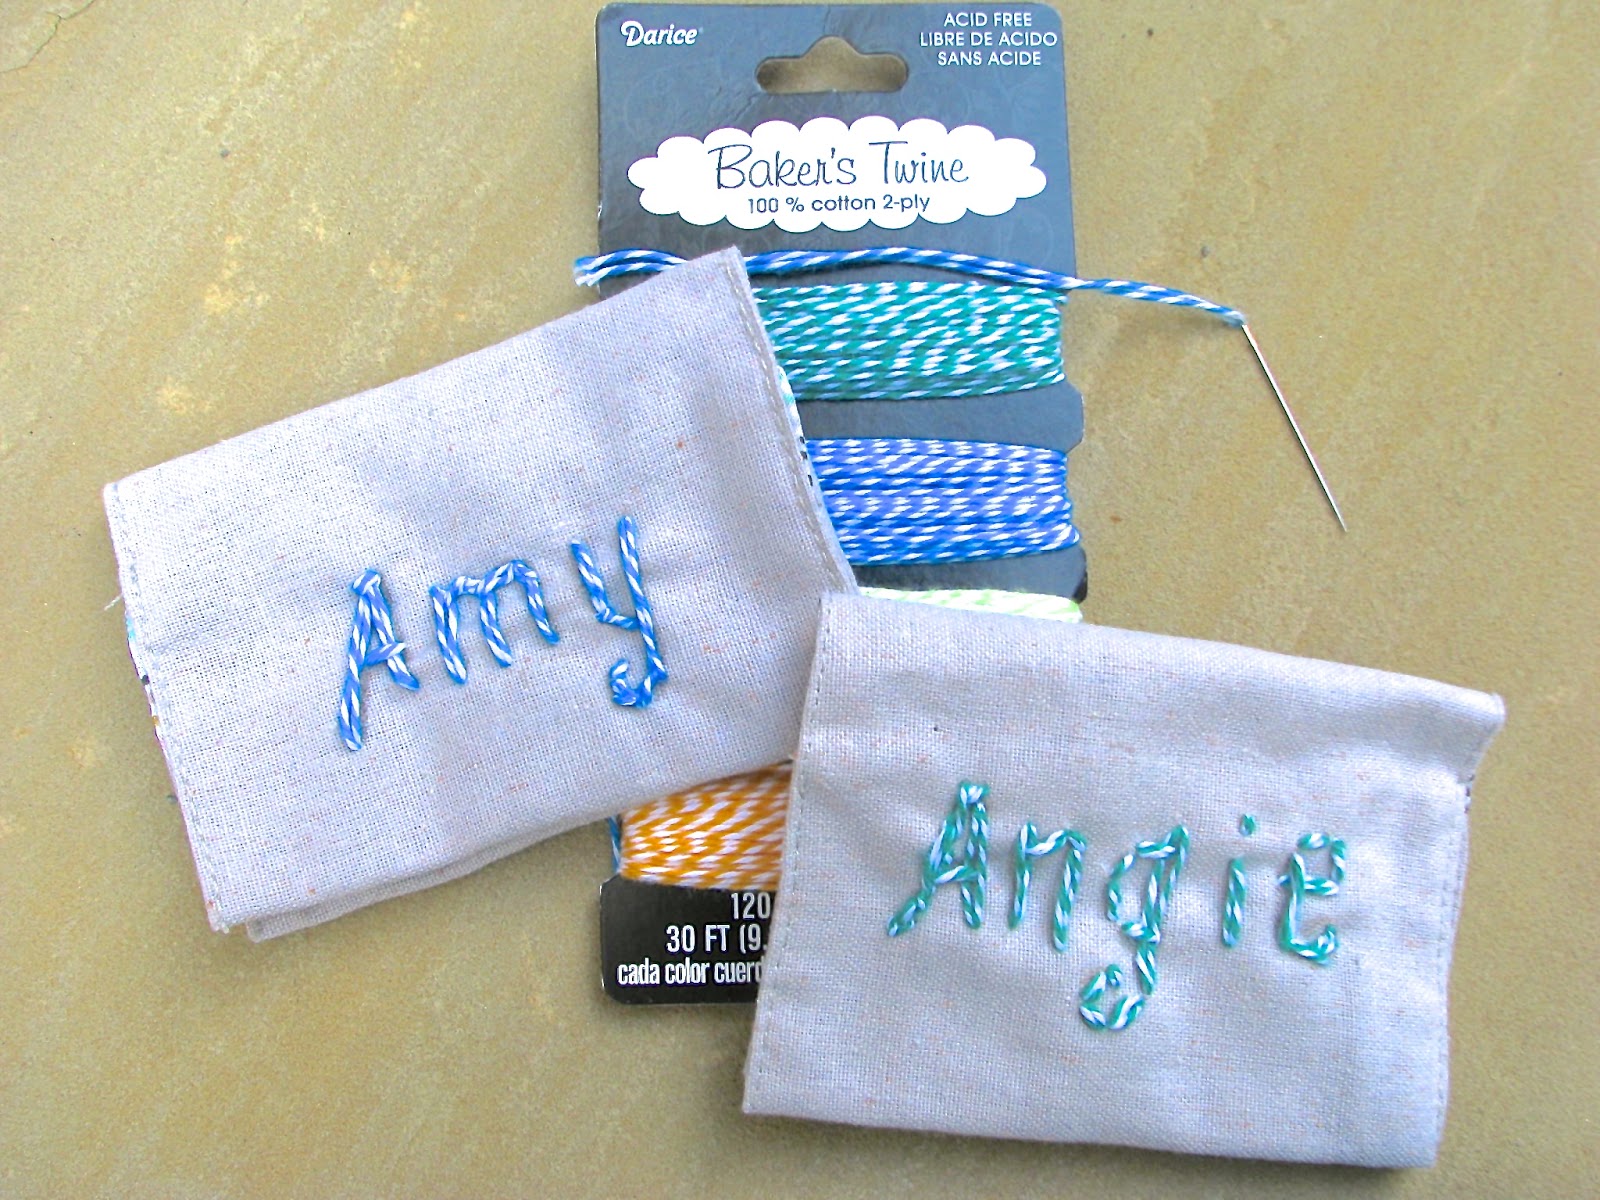 Card holder embroidered with baker's twine